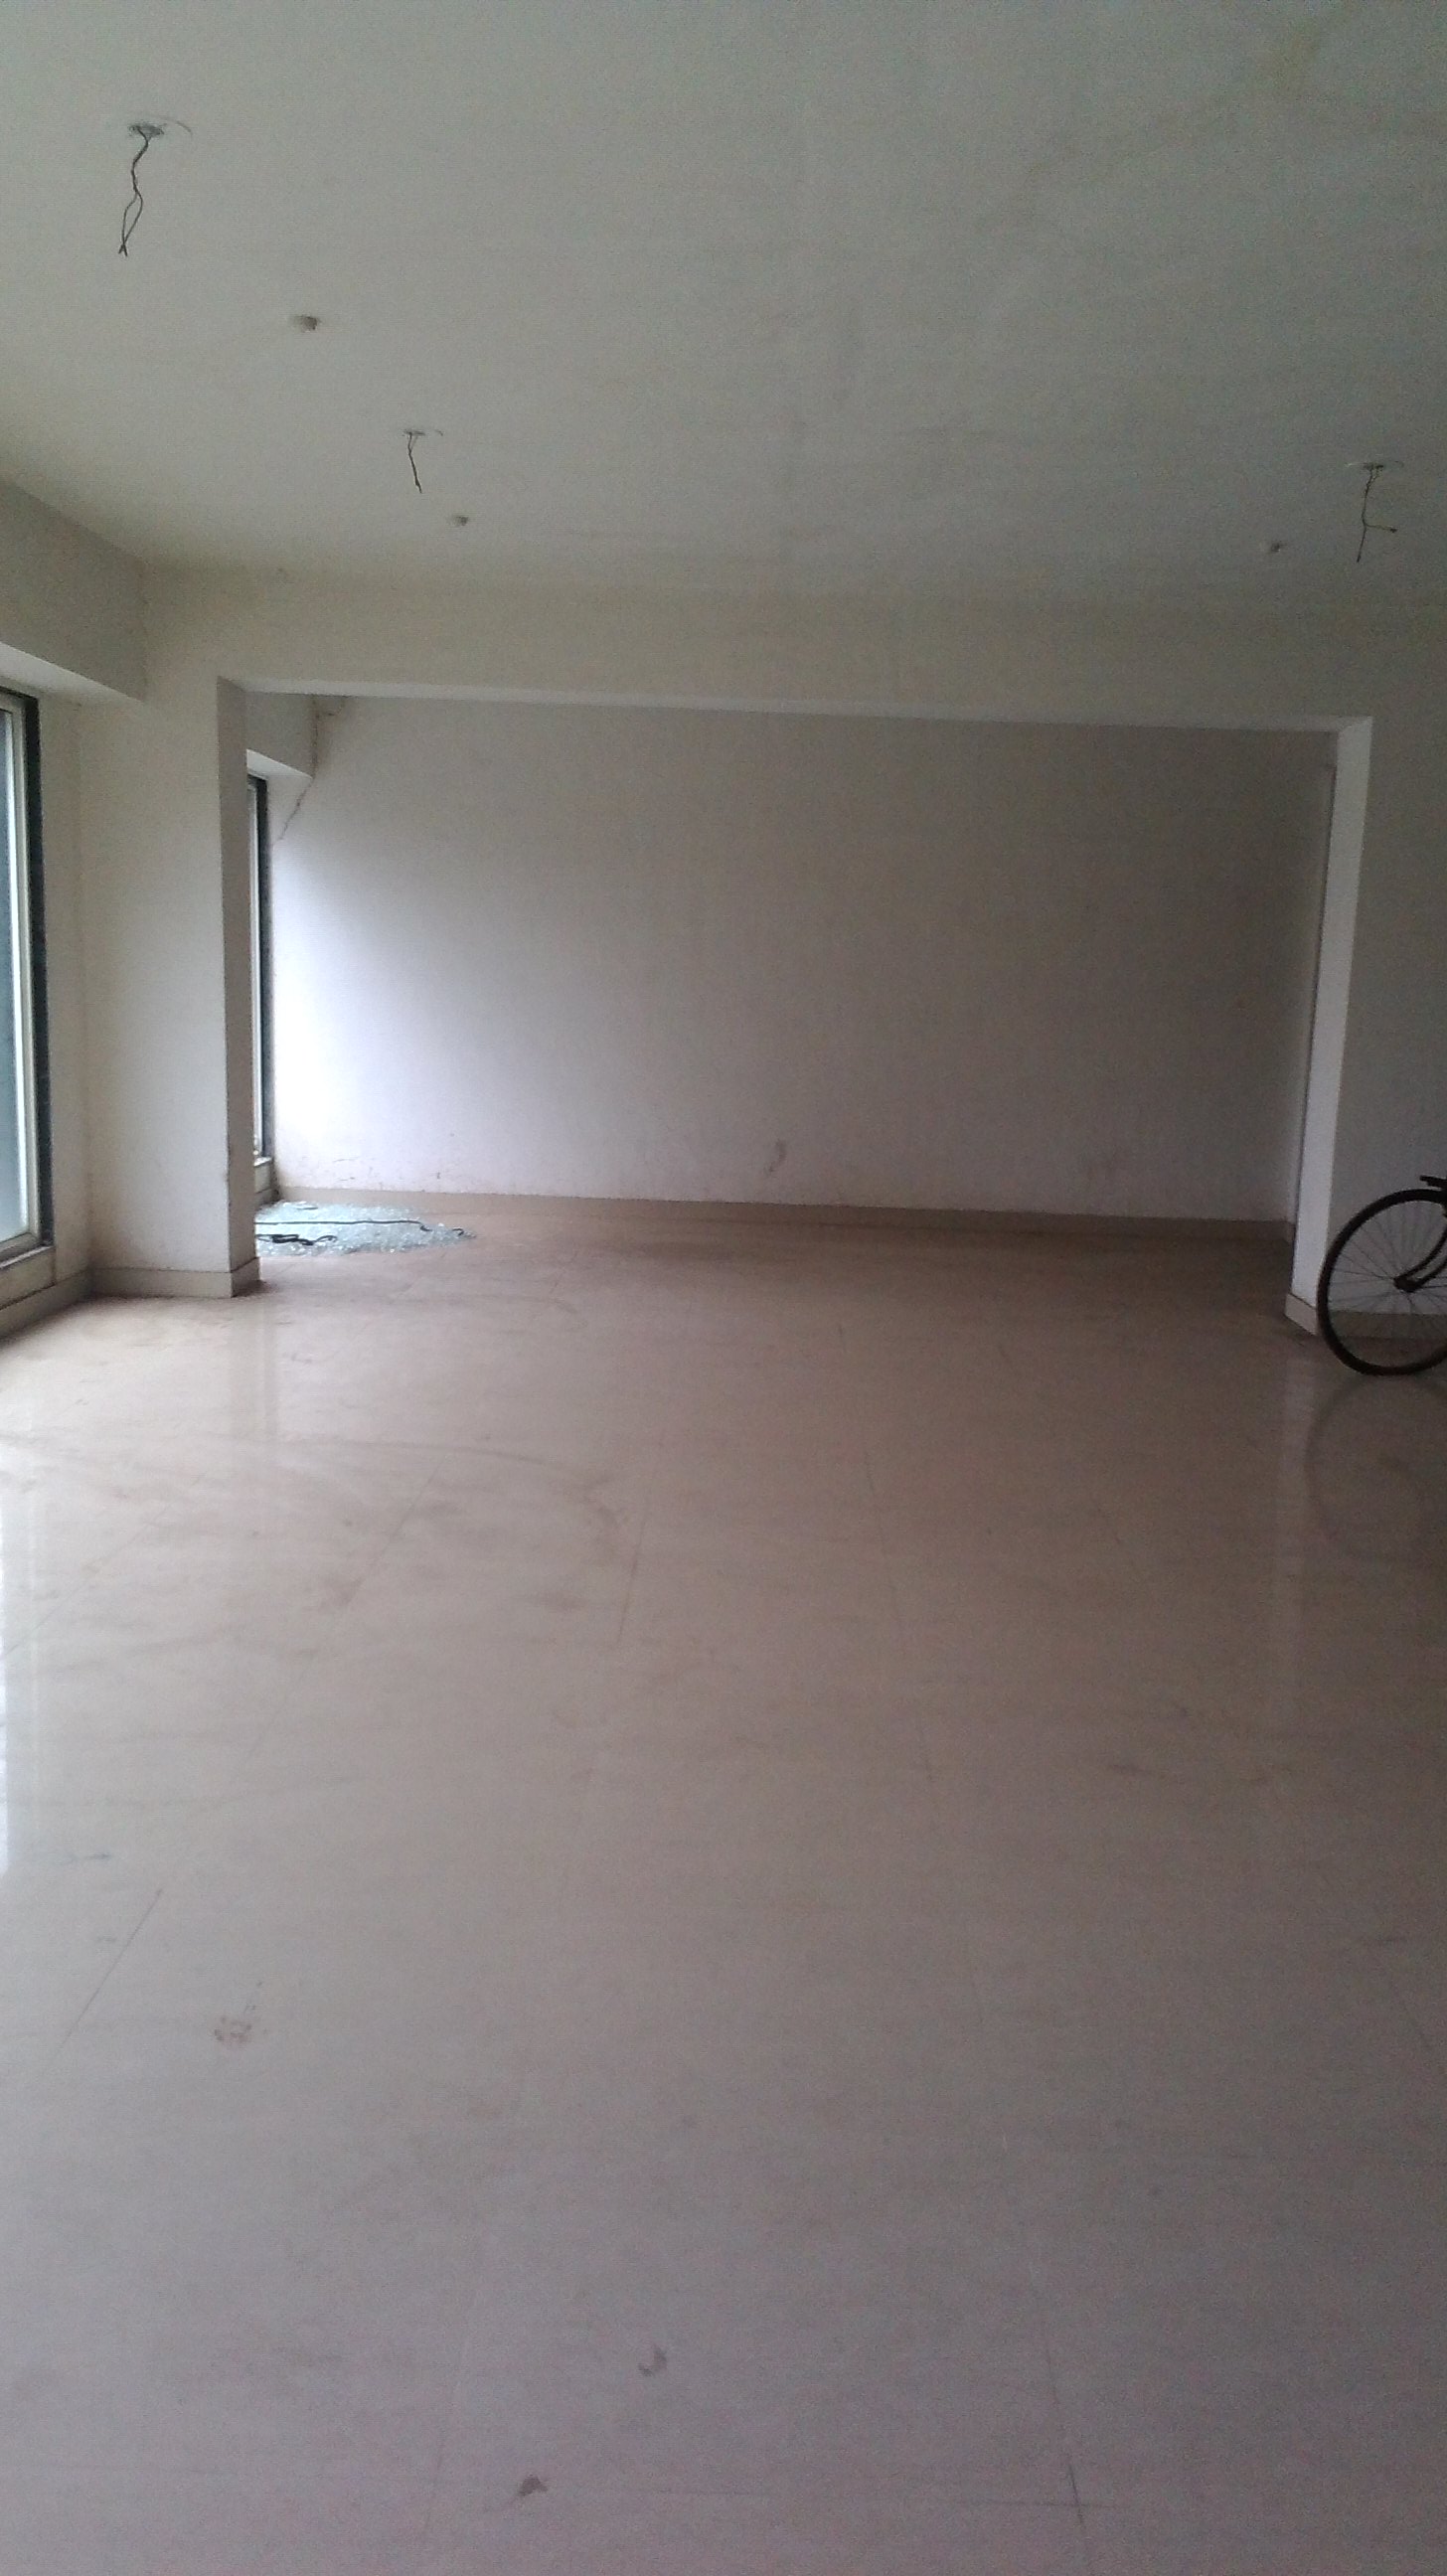 Commercial Office Space for Rent in Oasis Sapphire, Khopat, Opp to St Depot, Thane-West, Mumbai